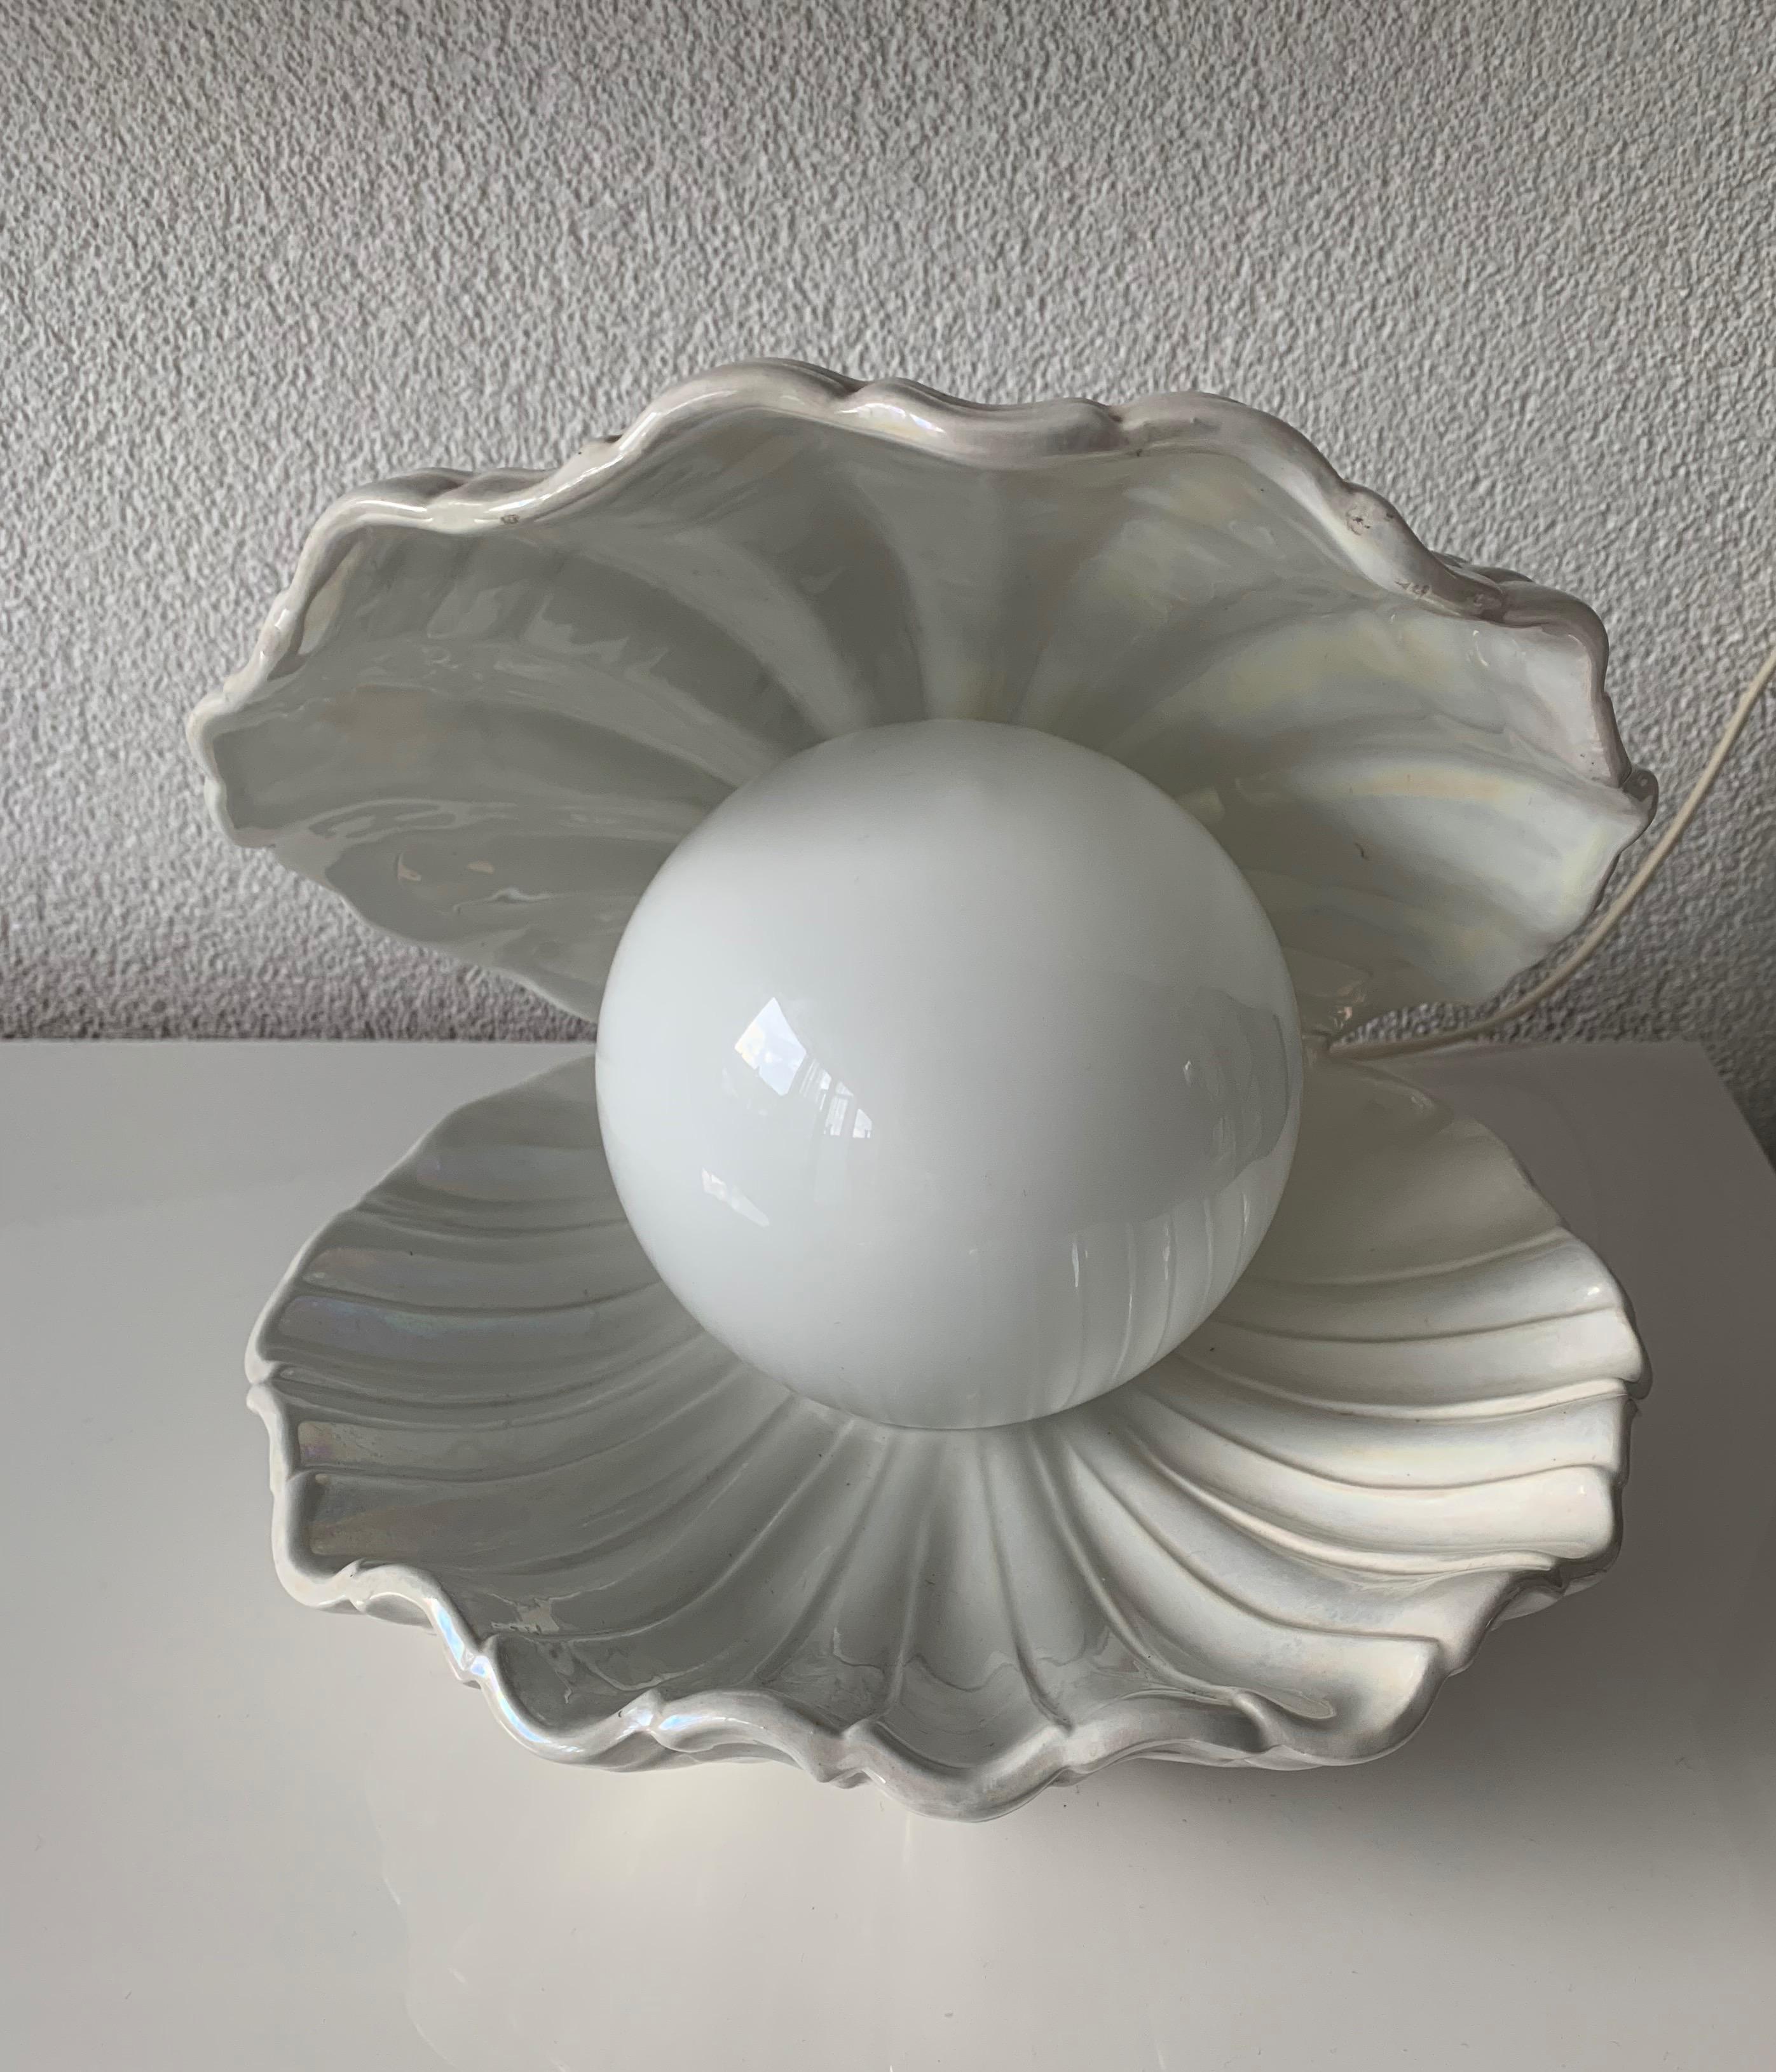 Rare 1970s Glazed Ceramic Shell or Clam with Glass Pearl Table or Night Lamp 7